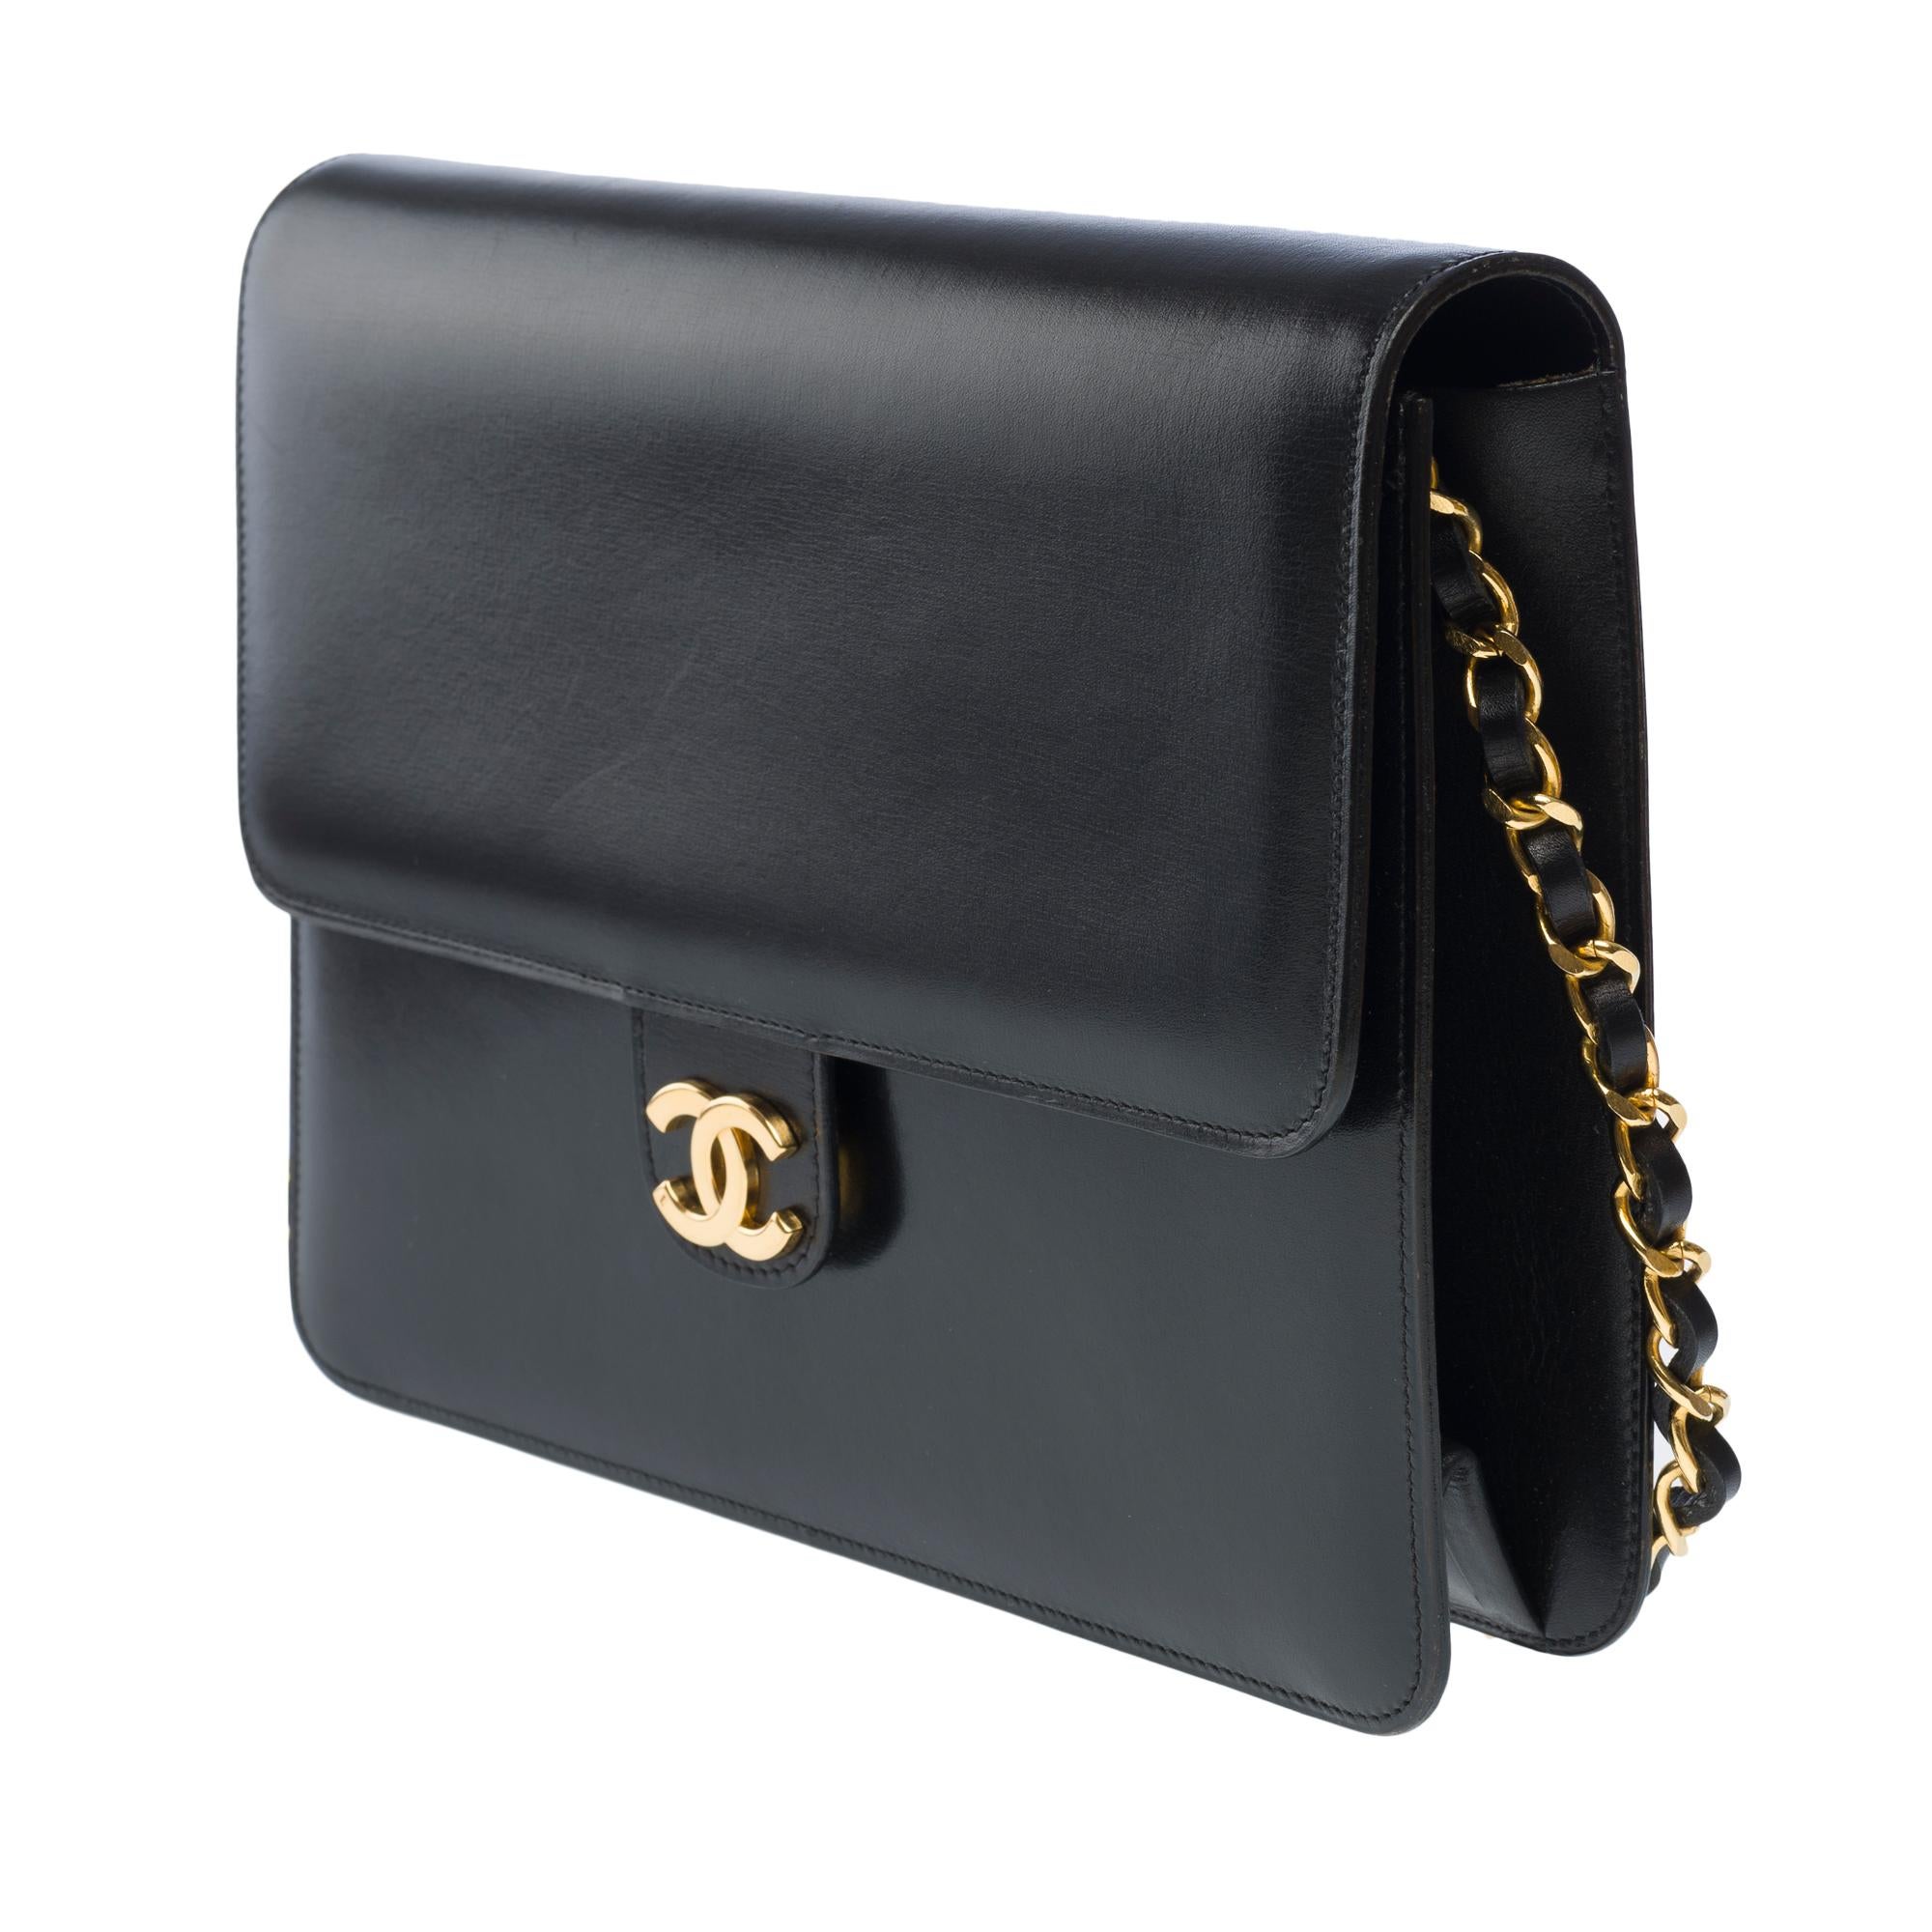 Gorgeous Chanel Classic shoulder flap bag in black box calfskin leather, GHW 9